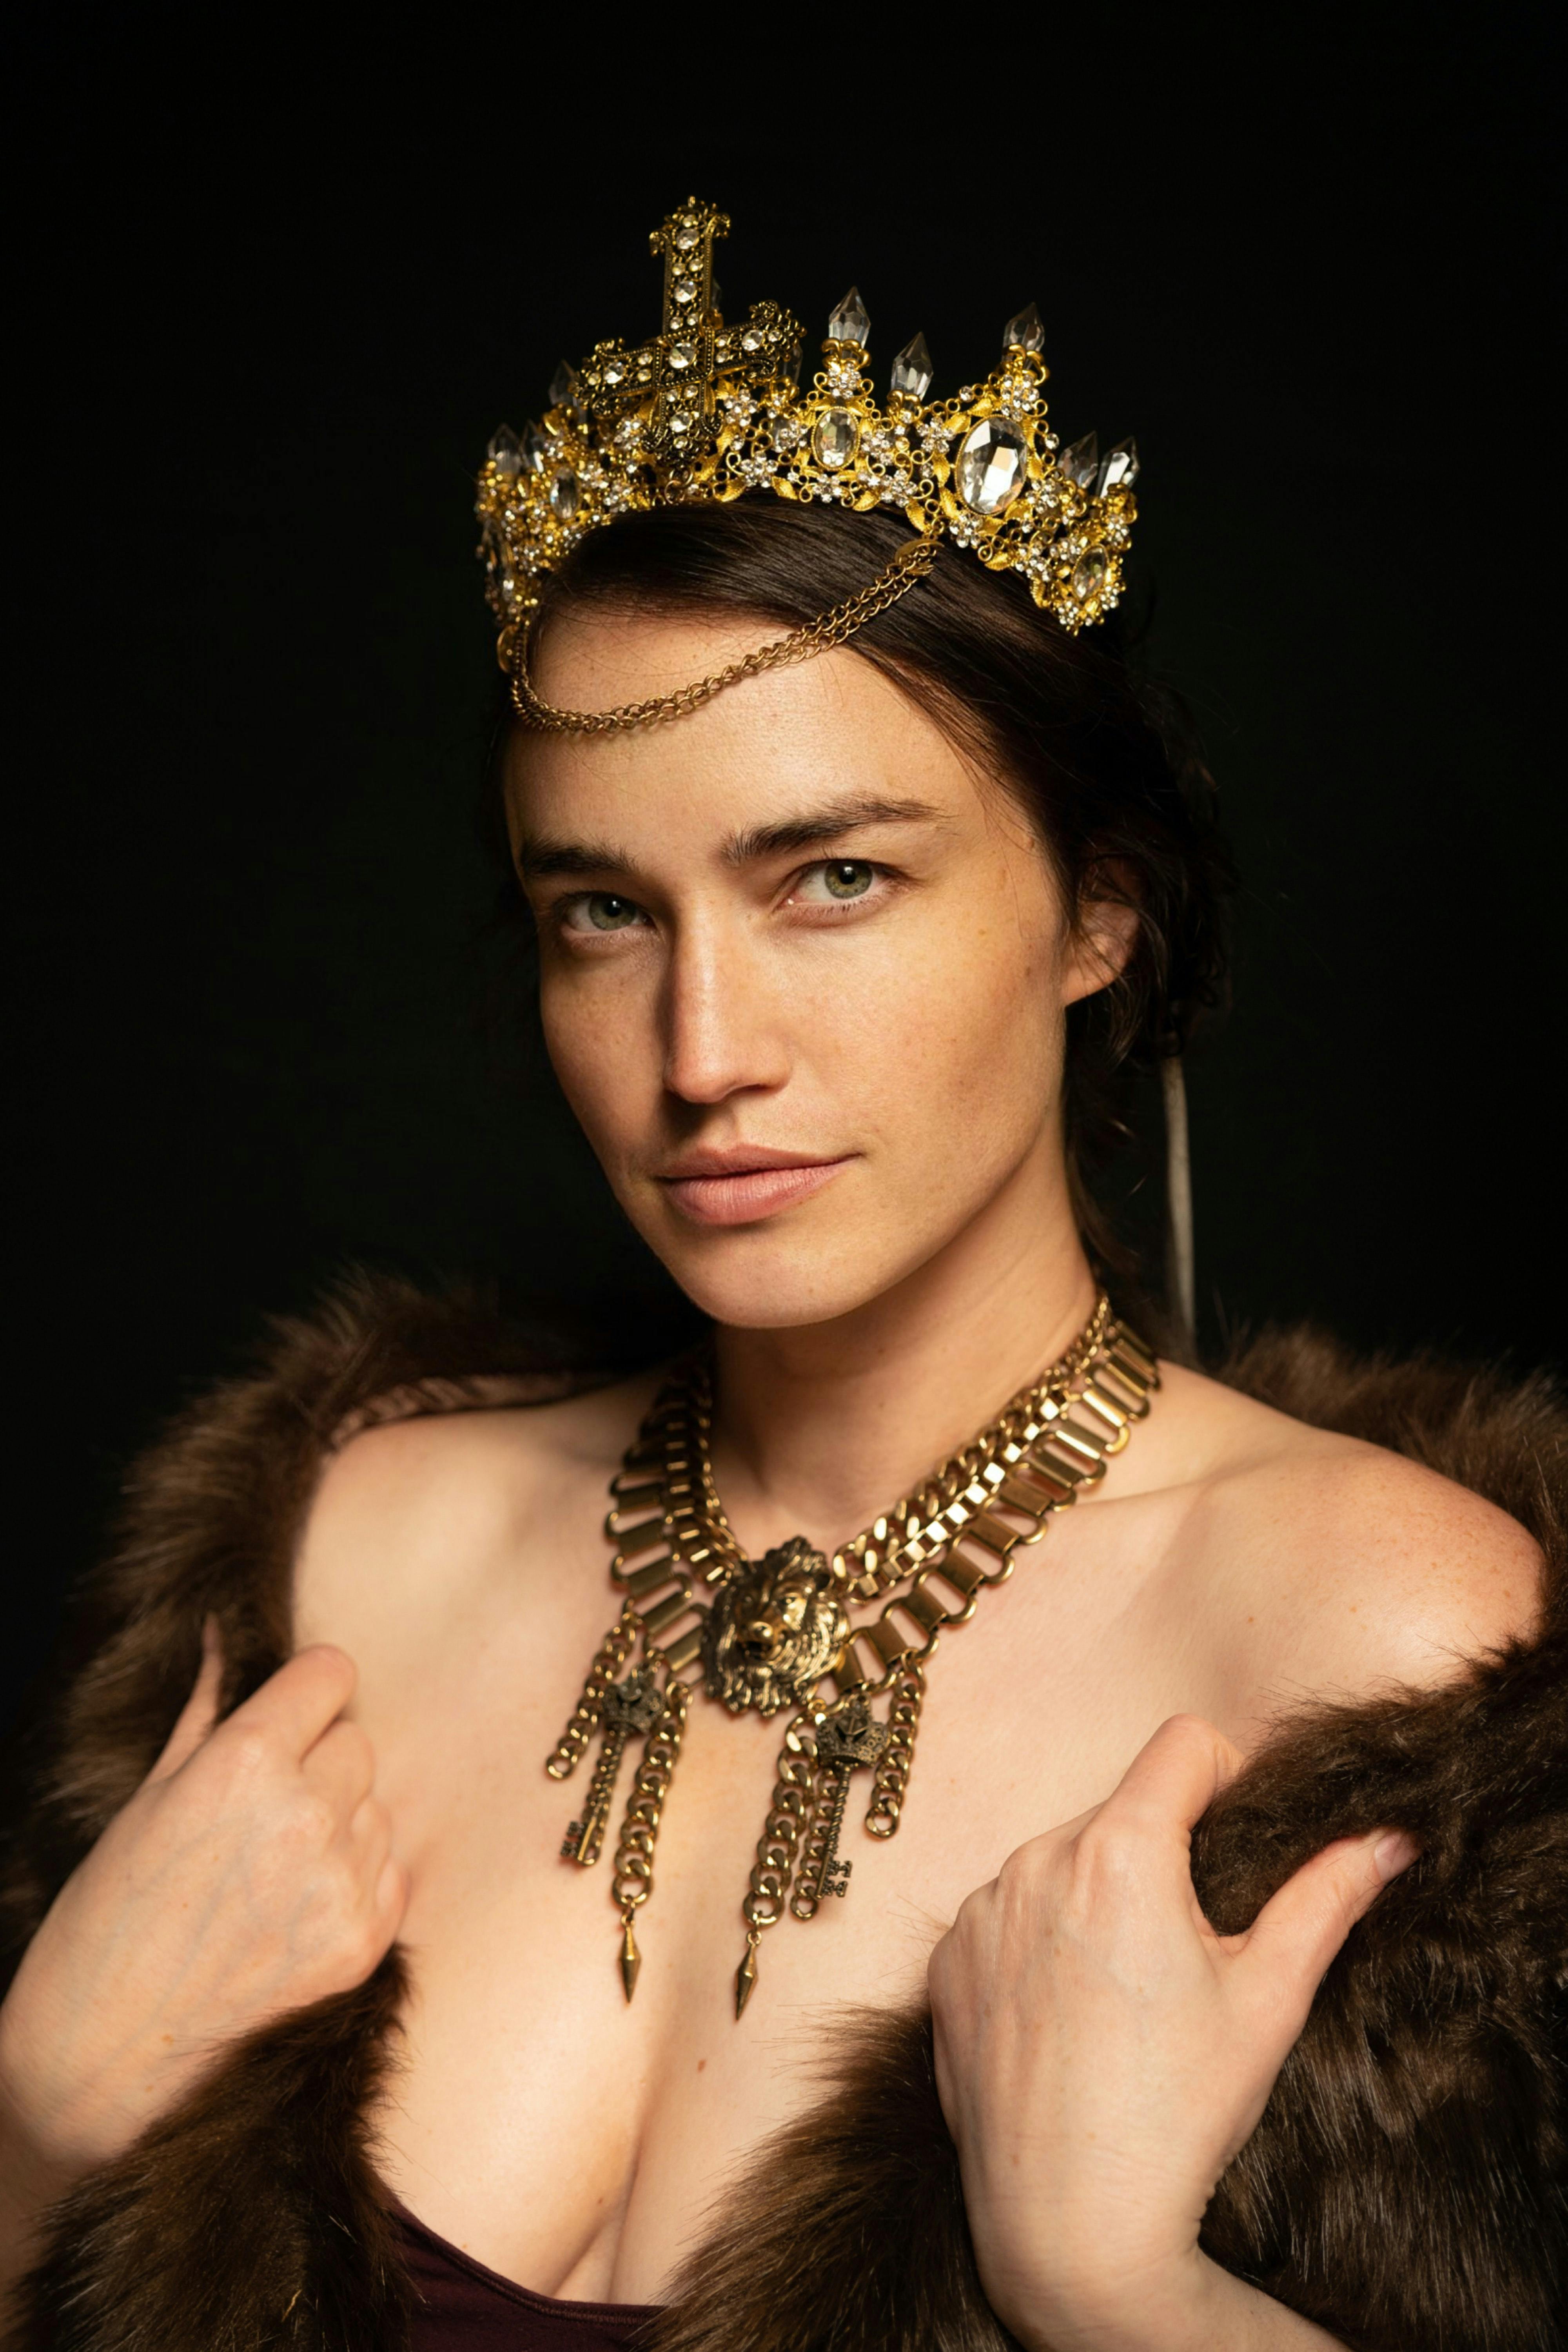 model in medieval gold crown and necklace with a fur scarf on her shoulders